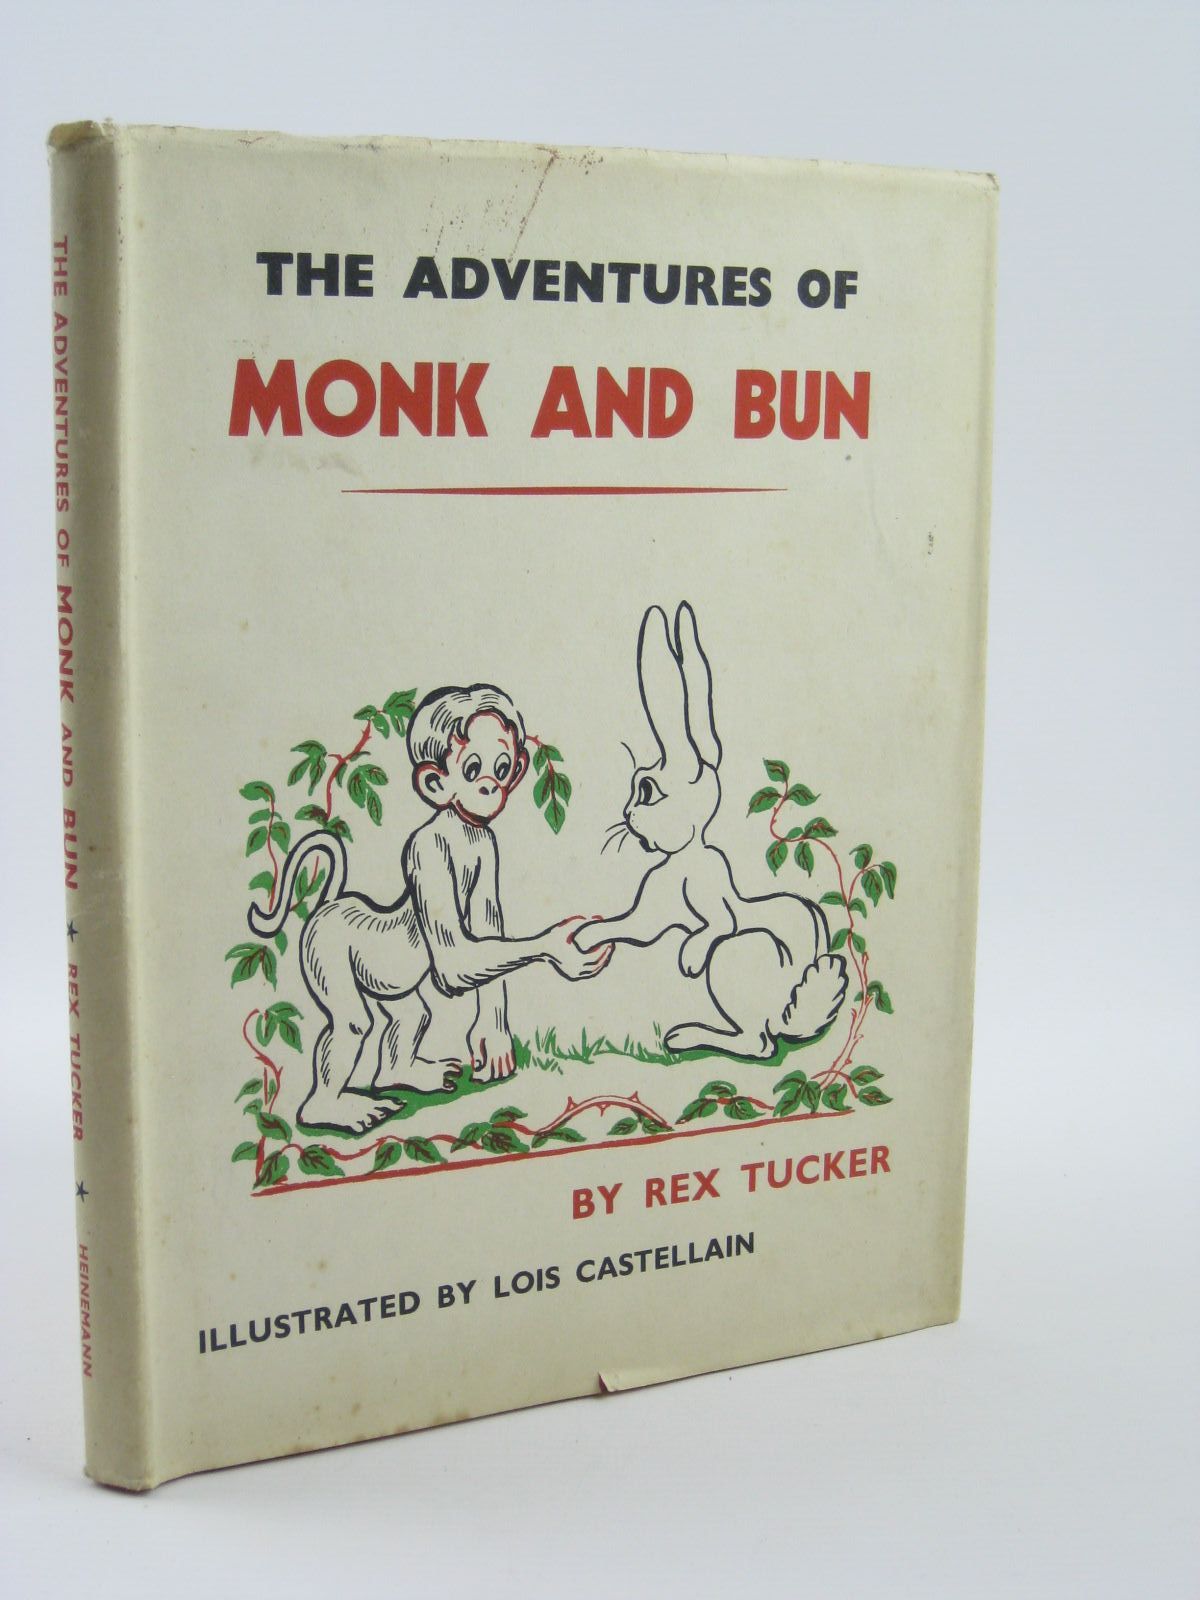 Cover of THE ADVENTURES OF MONK AND BUN by Rex Tucker